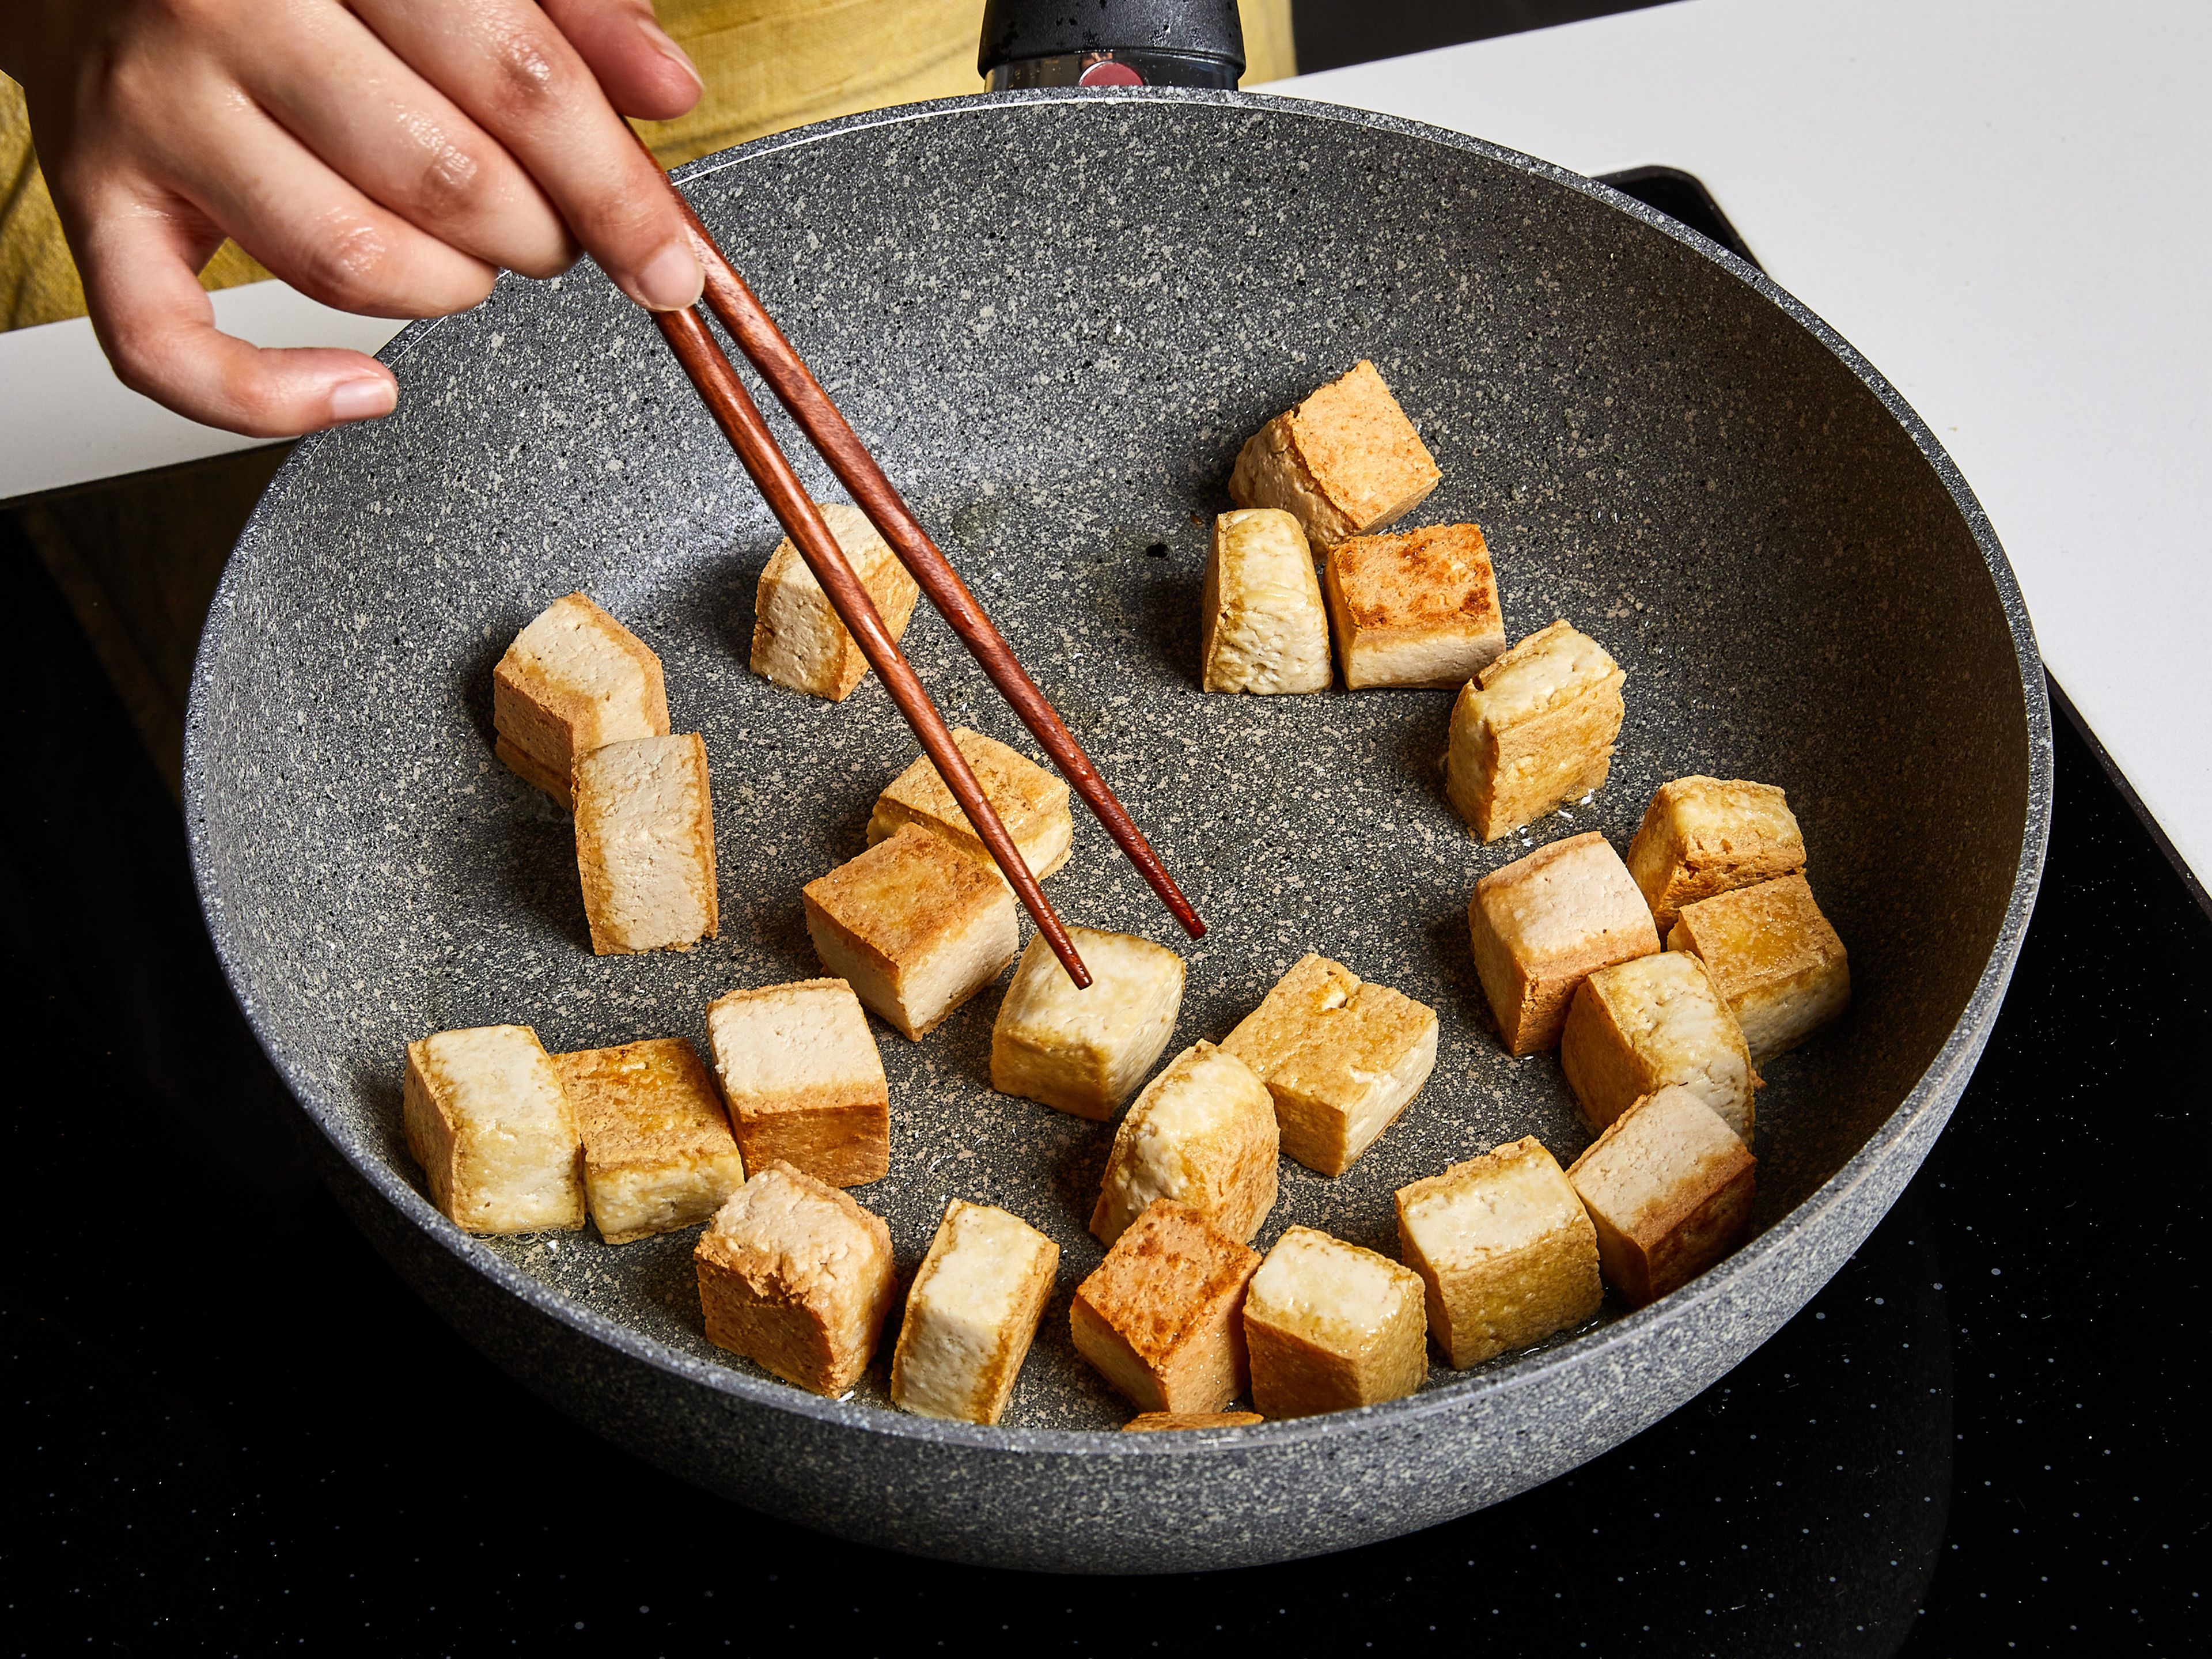 In a deep, non-stick frying pan, heat vegetable oil over medium heat, add tofu cubes, fry until all sides are golden, for about 2-3 min. per side. Remove from the pan and set aside. Add green beans, fry for about 3 min.